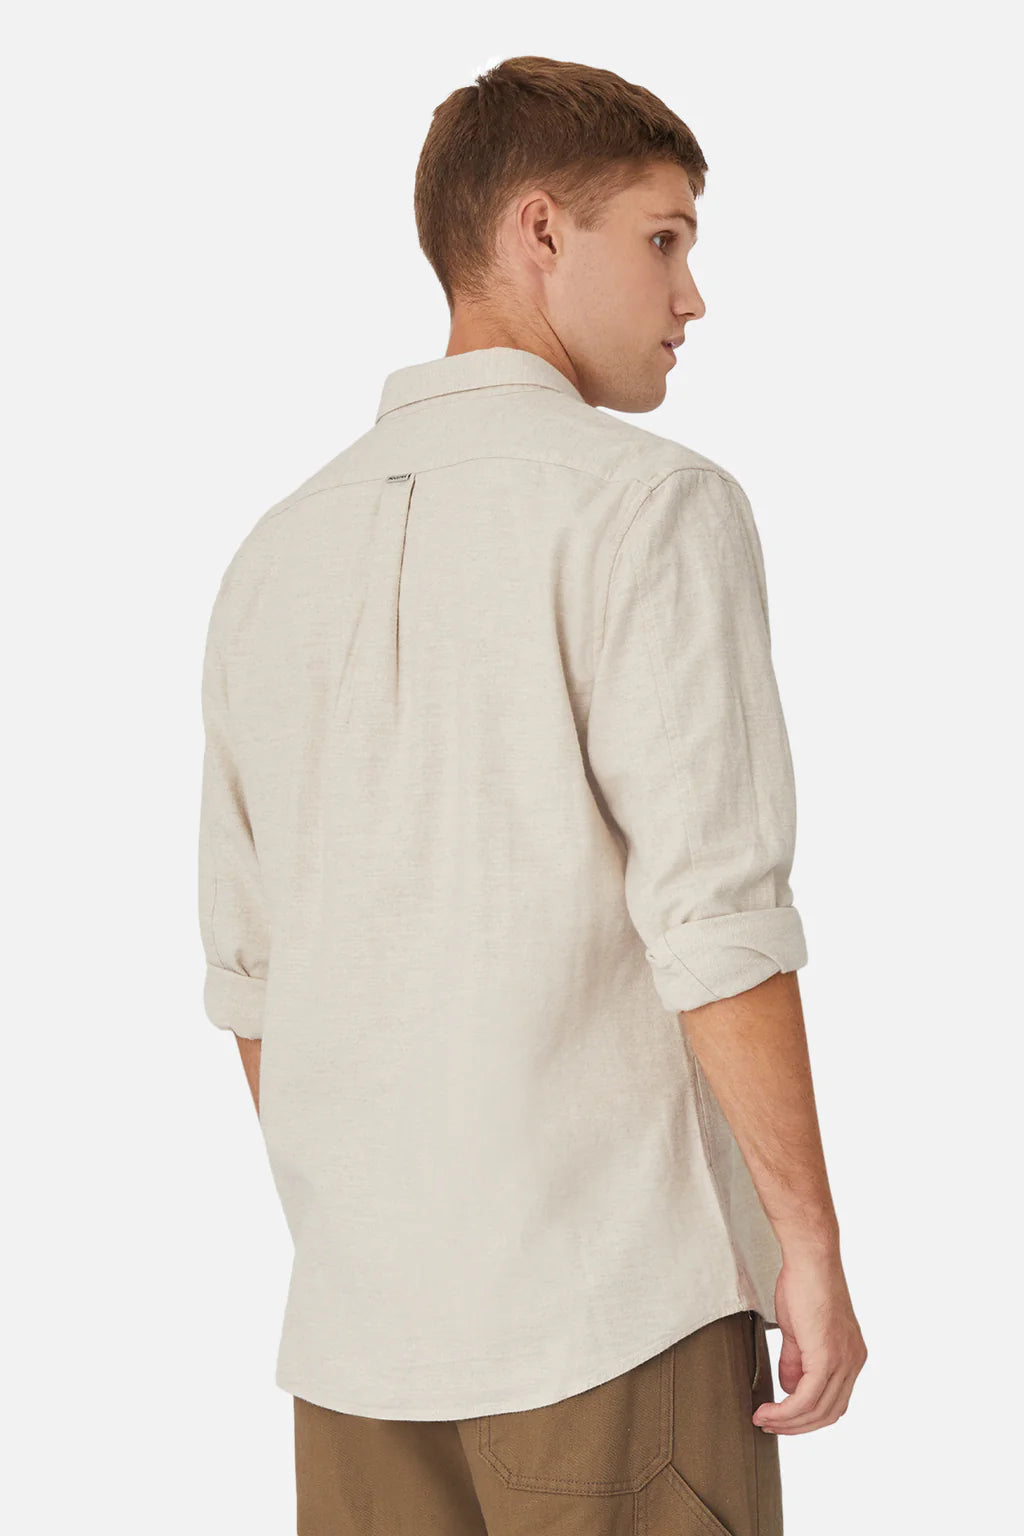 INDUSTIRE - The Taylor Shirt - Wheat